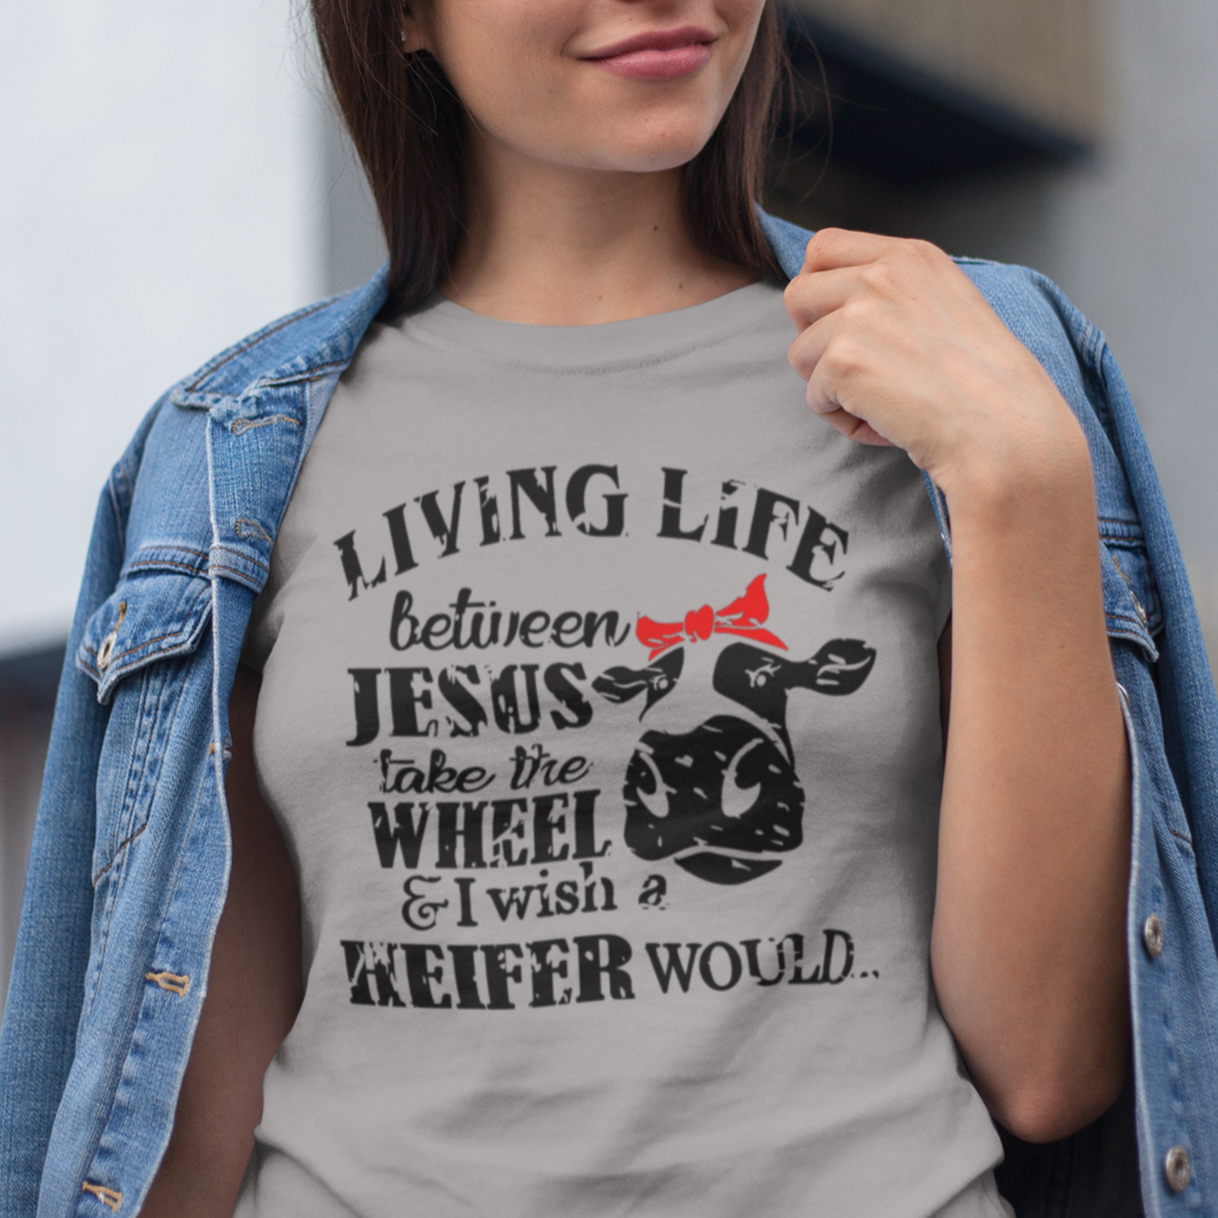 living-life-between-jesus-take-the-wheel-and-i-wish-a-heifer-would-athletic-heather-grey-t-shirt-portrait-of-a-beautiful-asian-girl